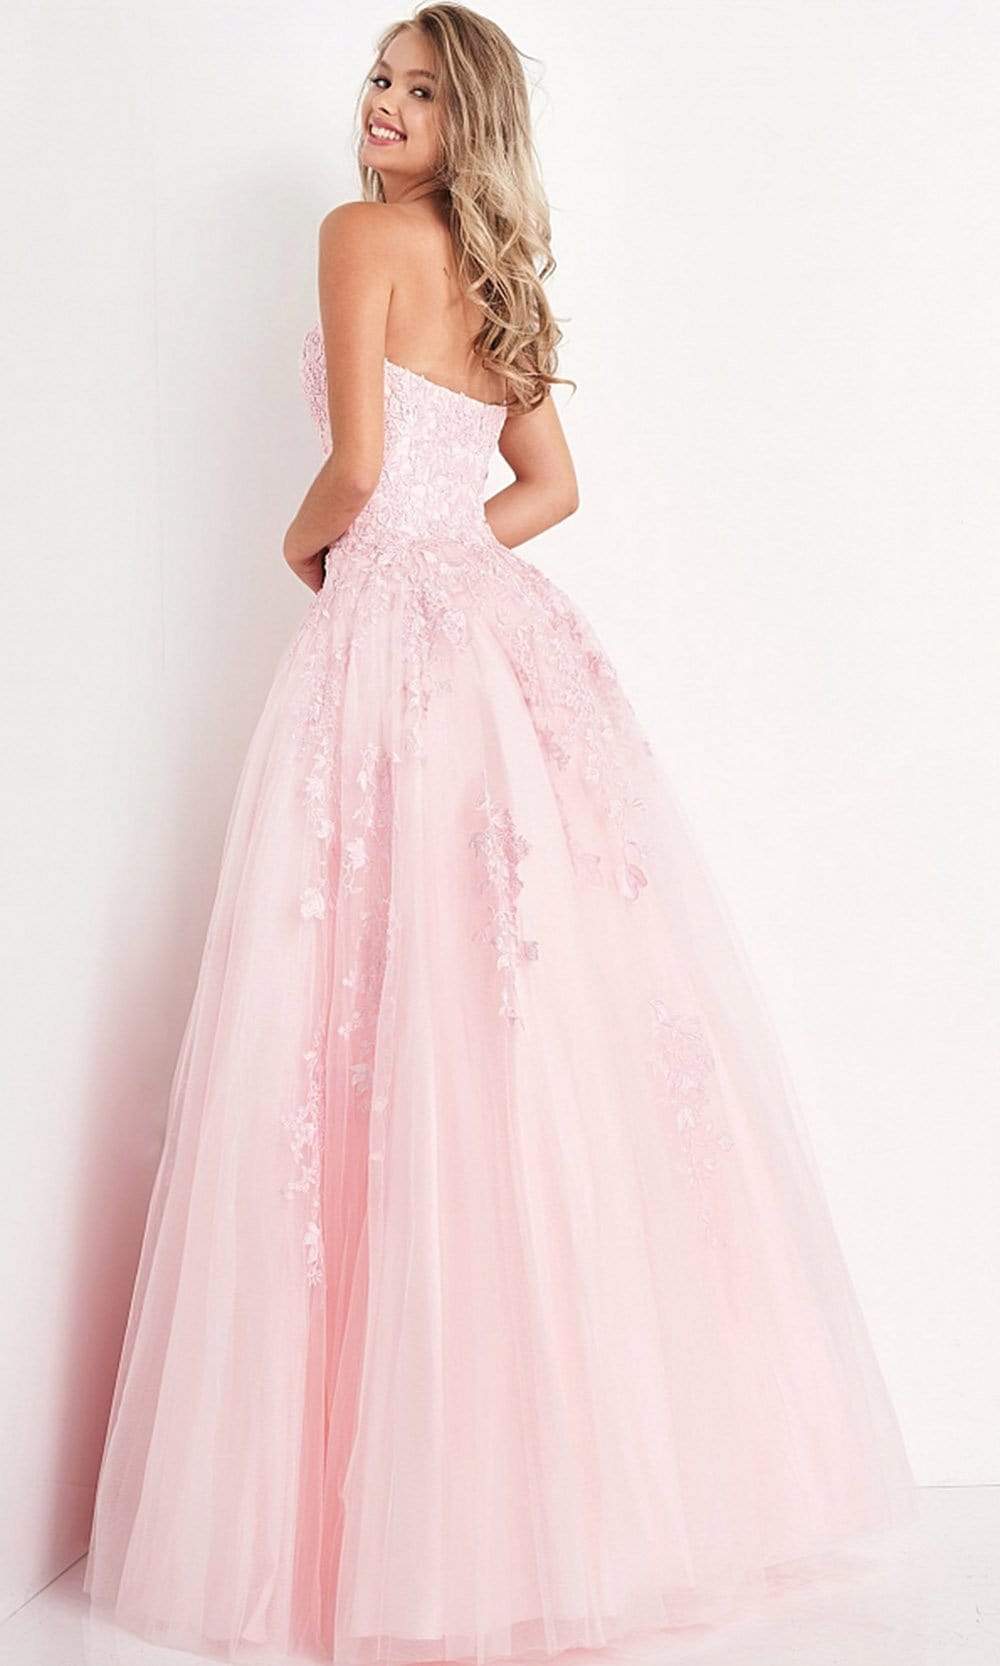 Jovani - JVN1831 Strapless Sweetheart Neckline Embroidered Tulle Gown Prom Dresses